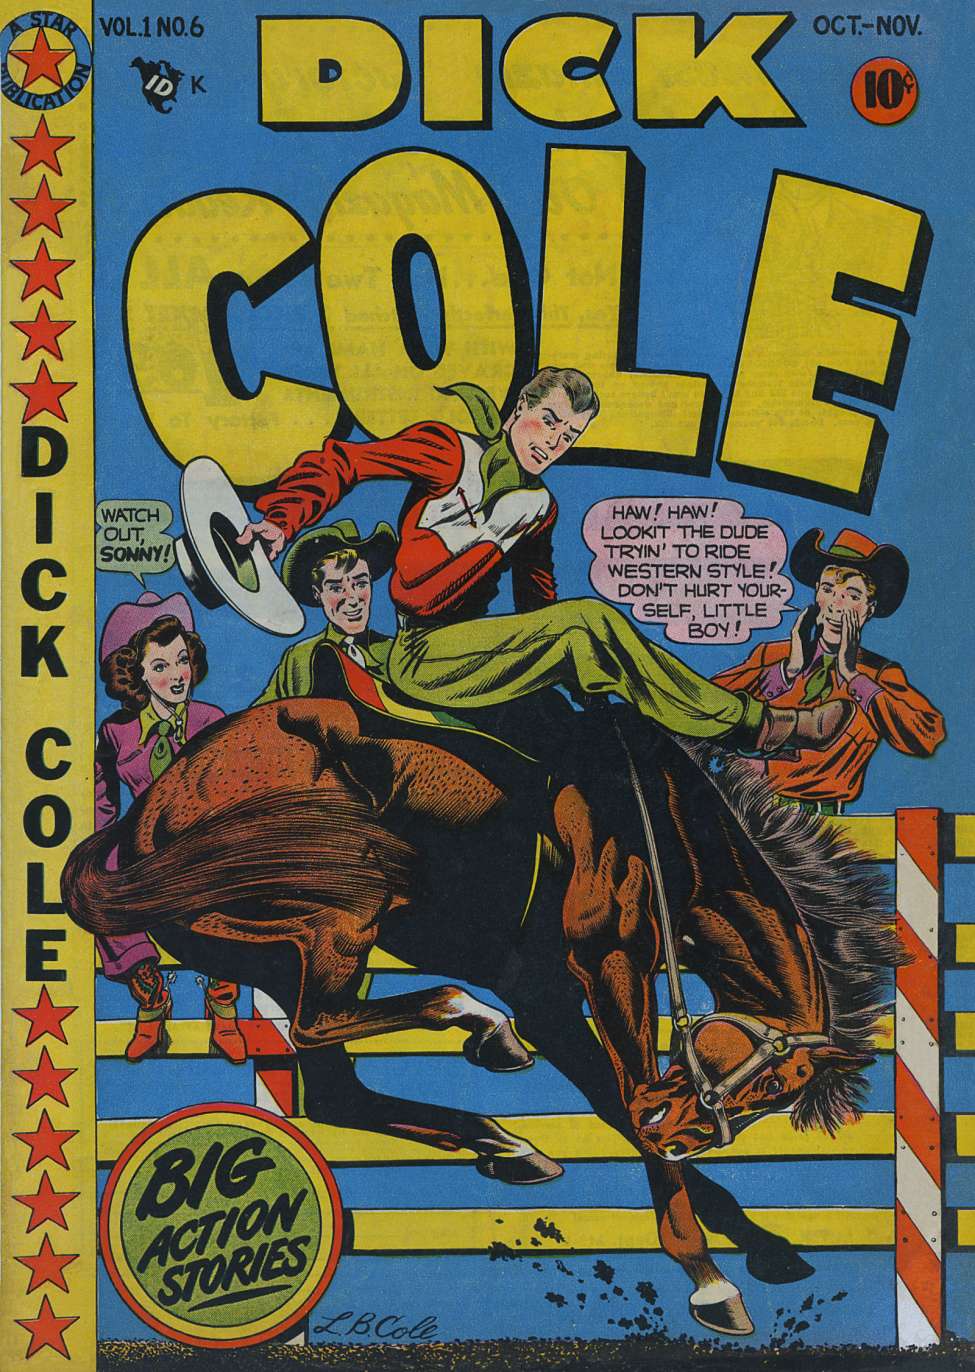 Book Cover For Dick Cole 6 - Version 2